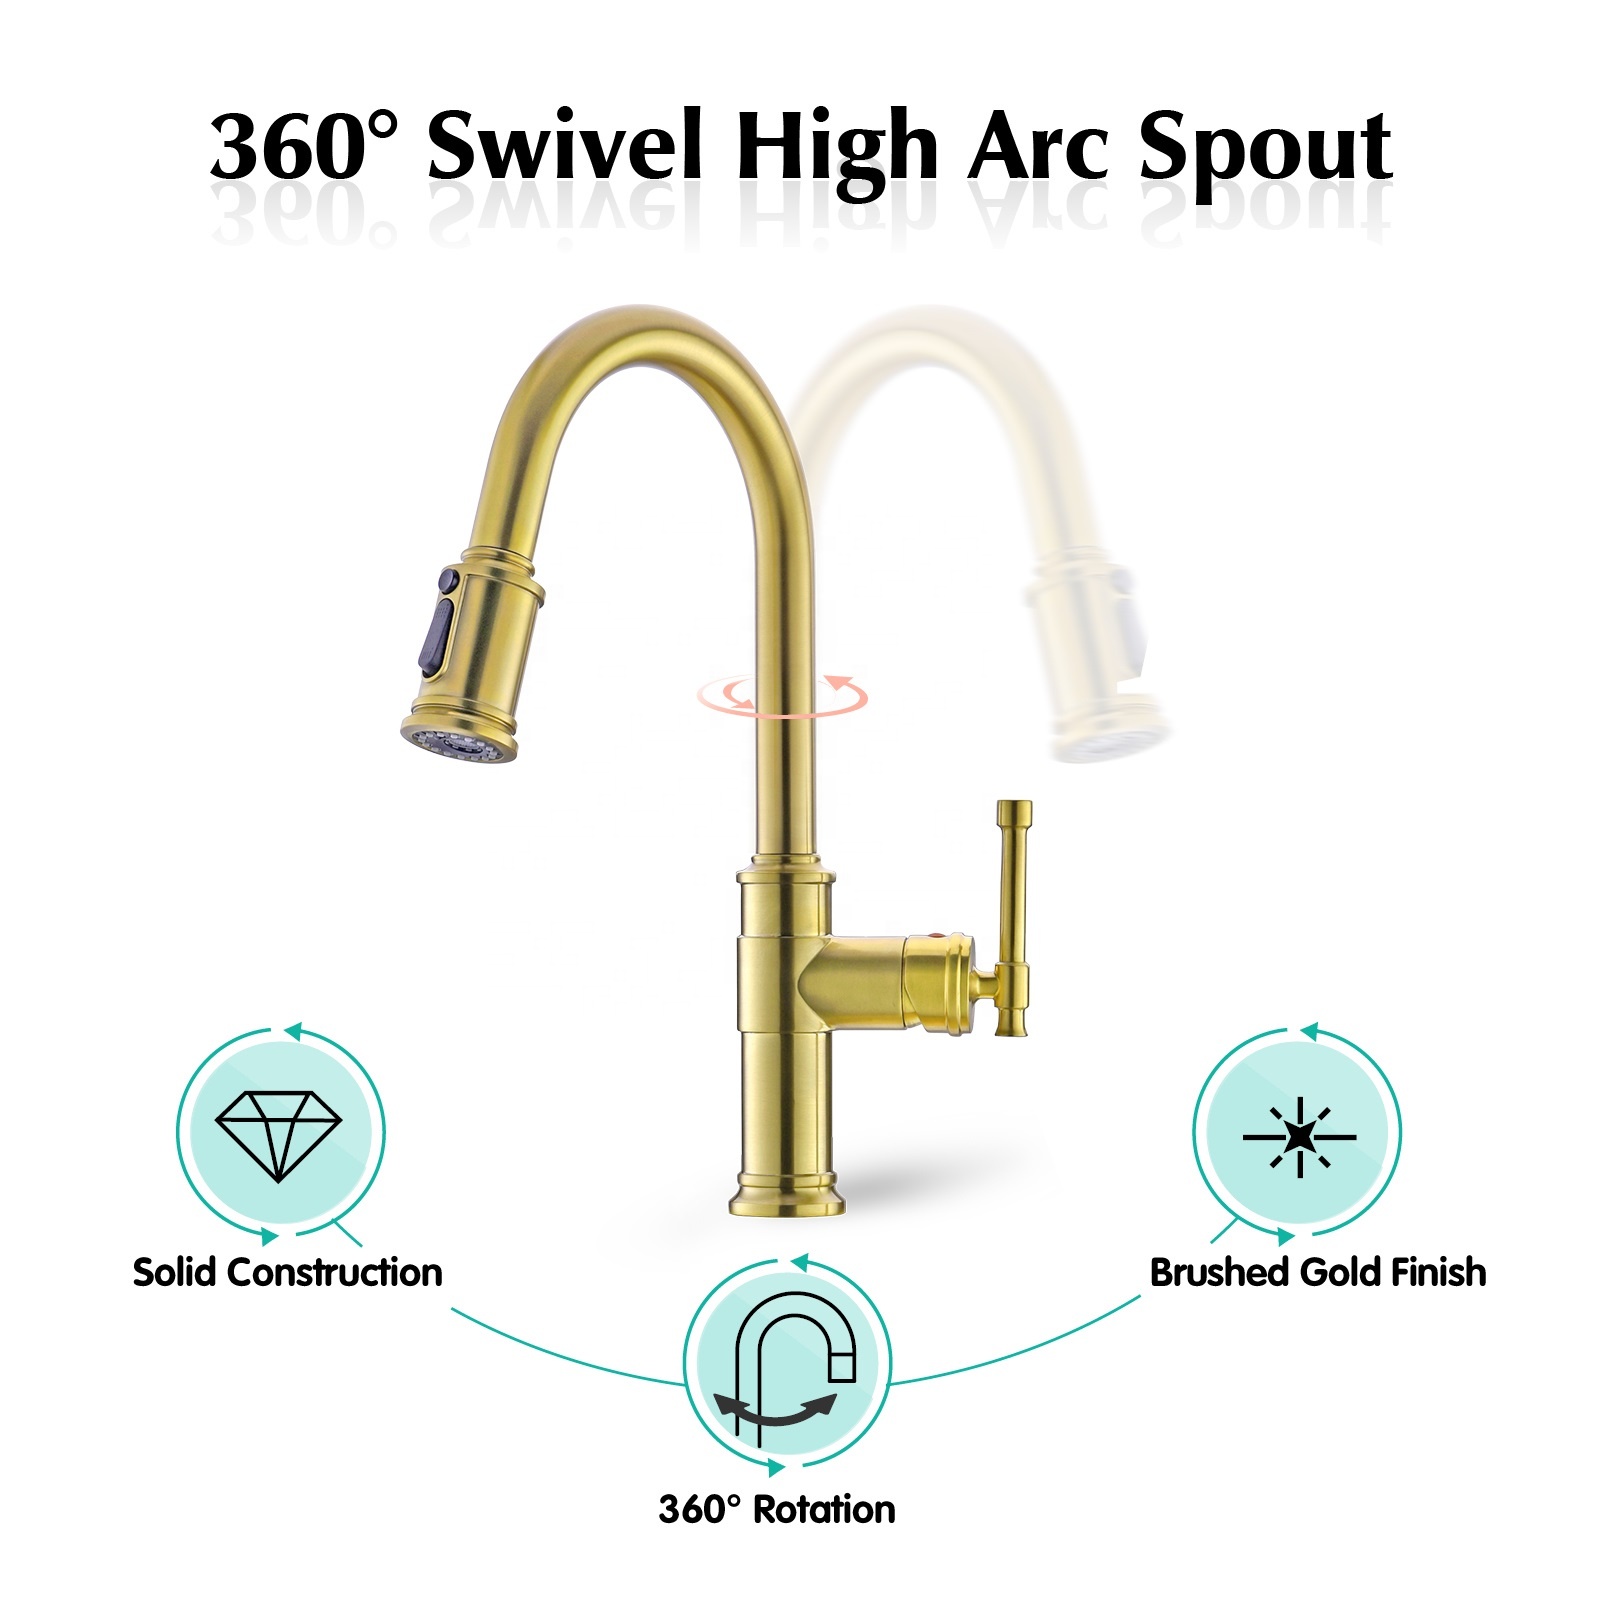 Kitchen Faucet Gold Sink Luxury Kitchen Faucet Pull Down Sprayer Faucet In Brushed Gold